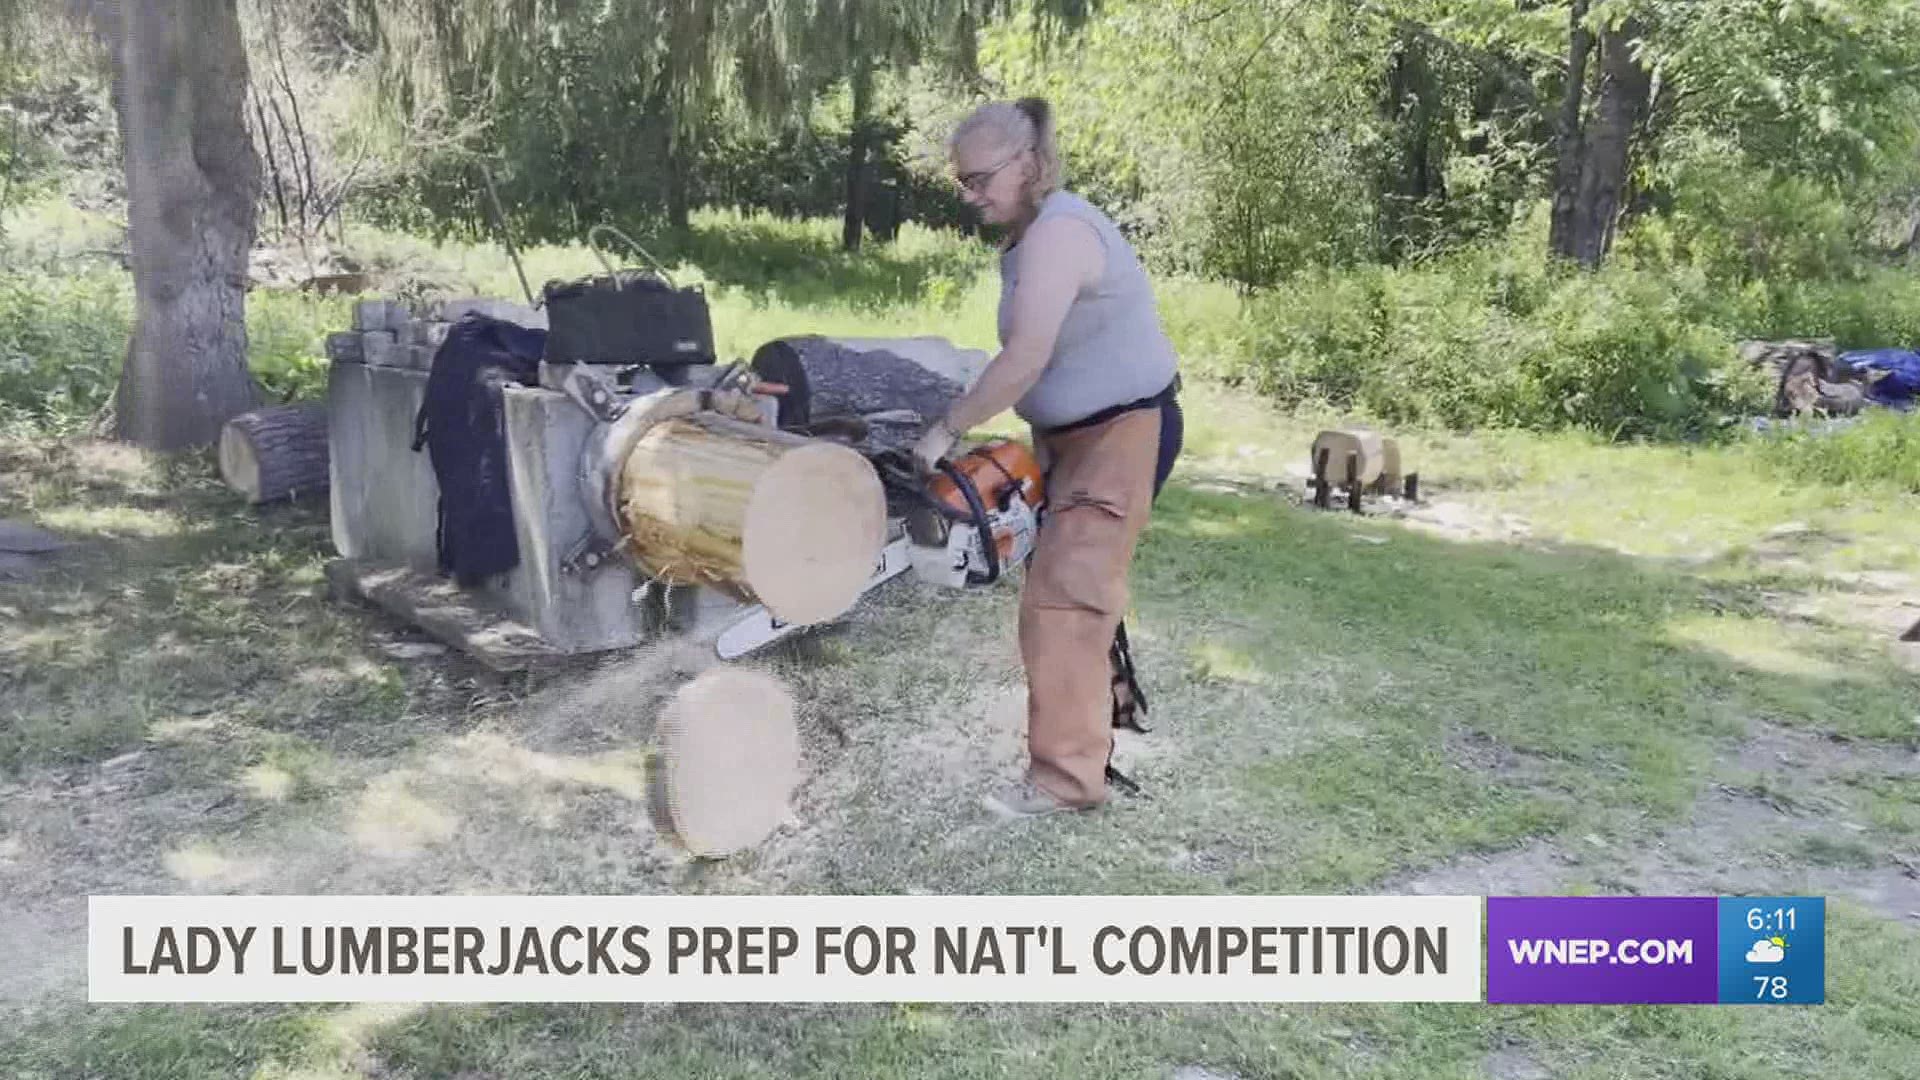 Two women from Susquehanna County are hoping to chop down their competition this weekend at the Stihl Timbersports qualifier in New York State.